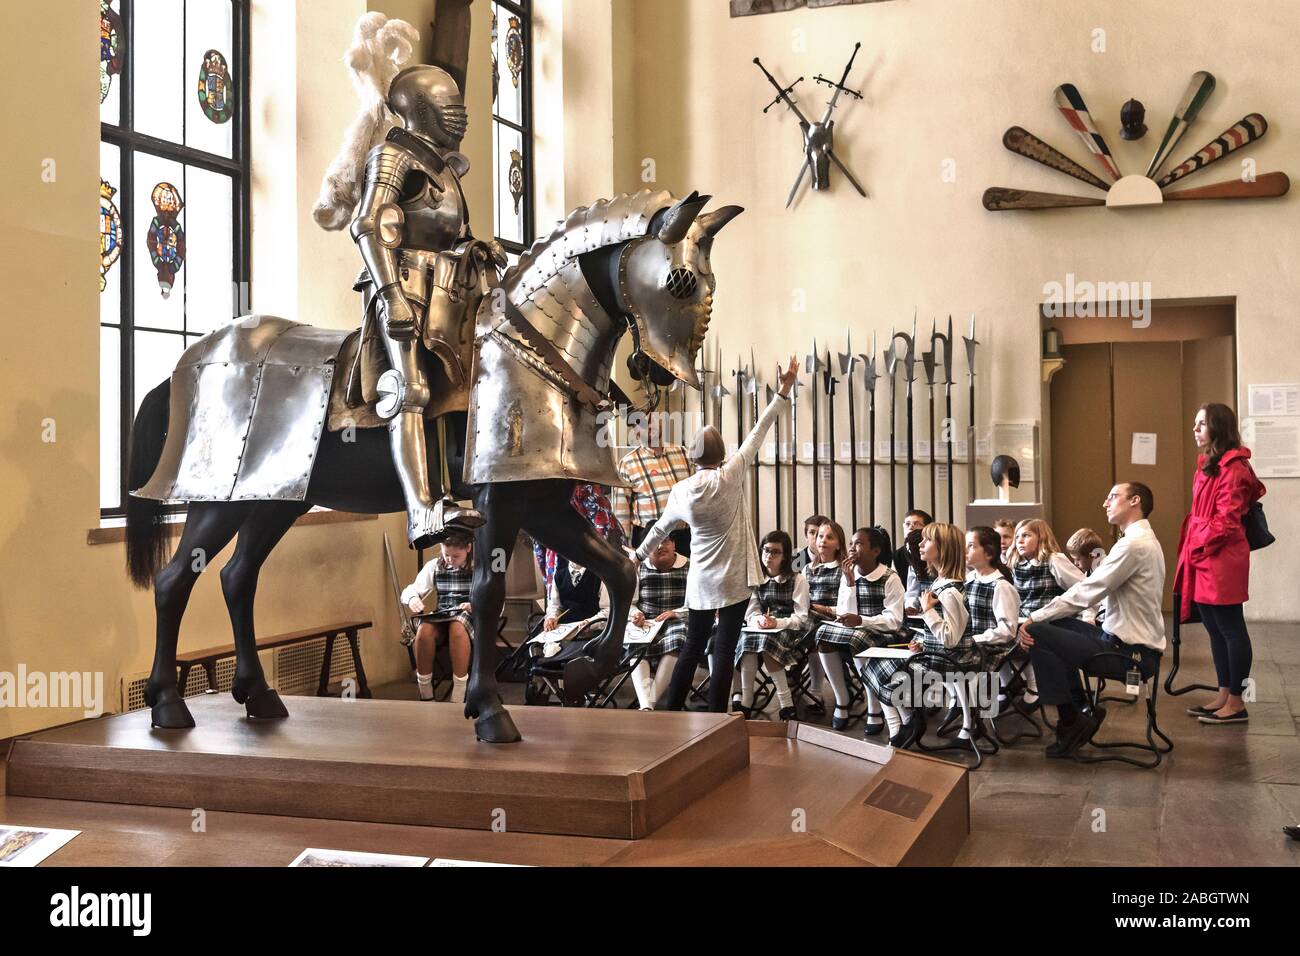 Museum lesson for school students at arms and armor room, Philadelphia Museum of Art, PA, USA Stock Photo